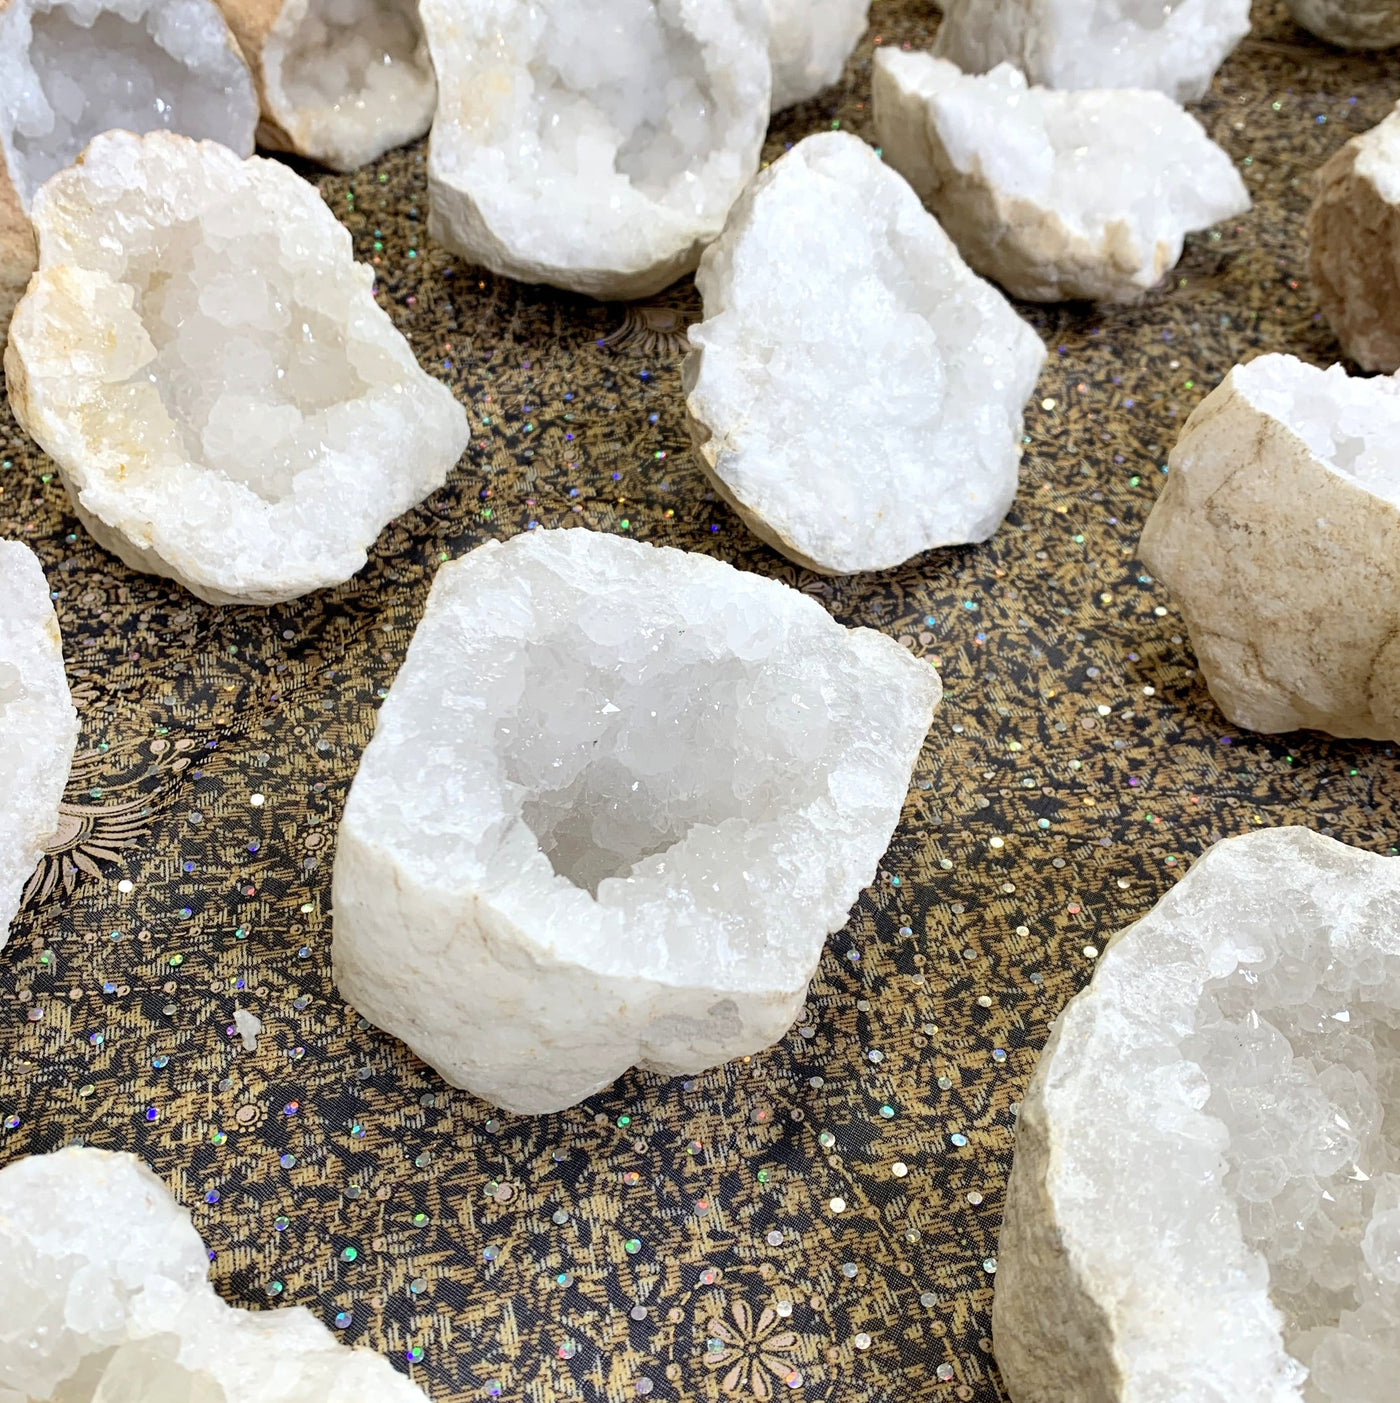 multiple half geodes displayed to show various sizes shapes crystallizations